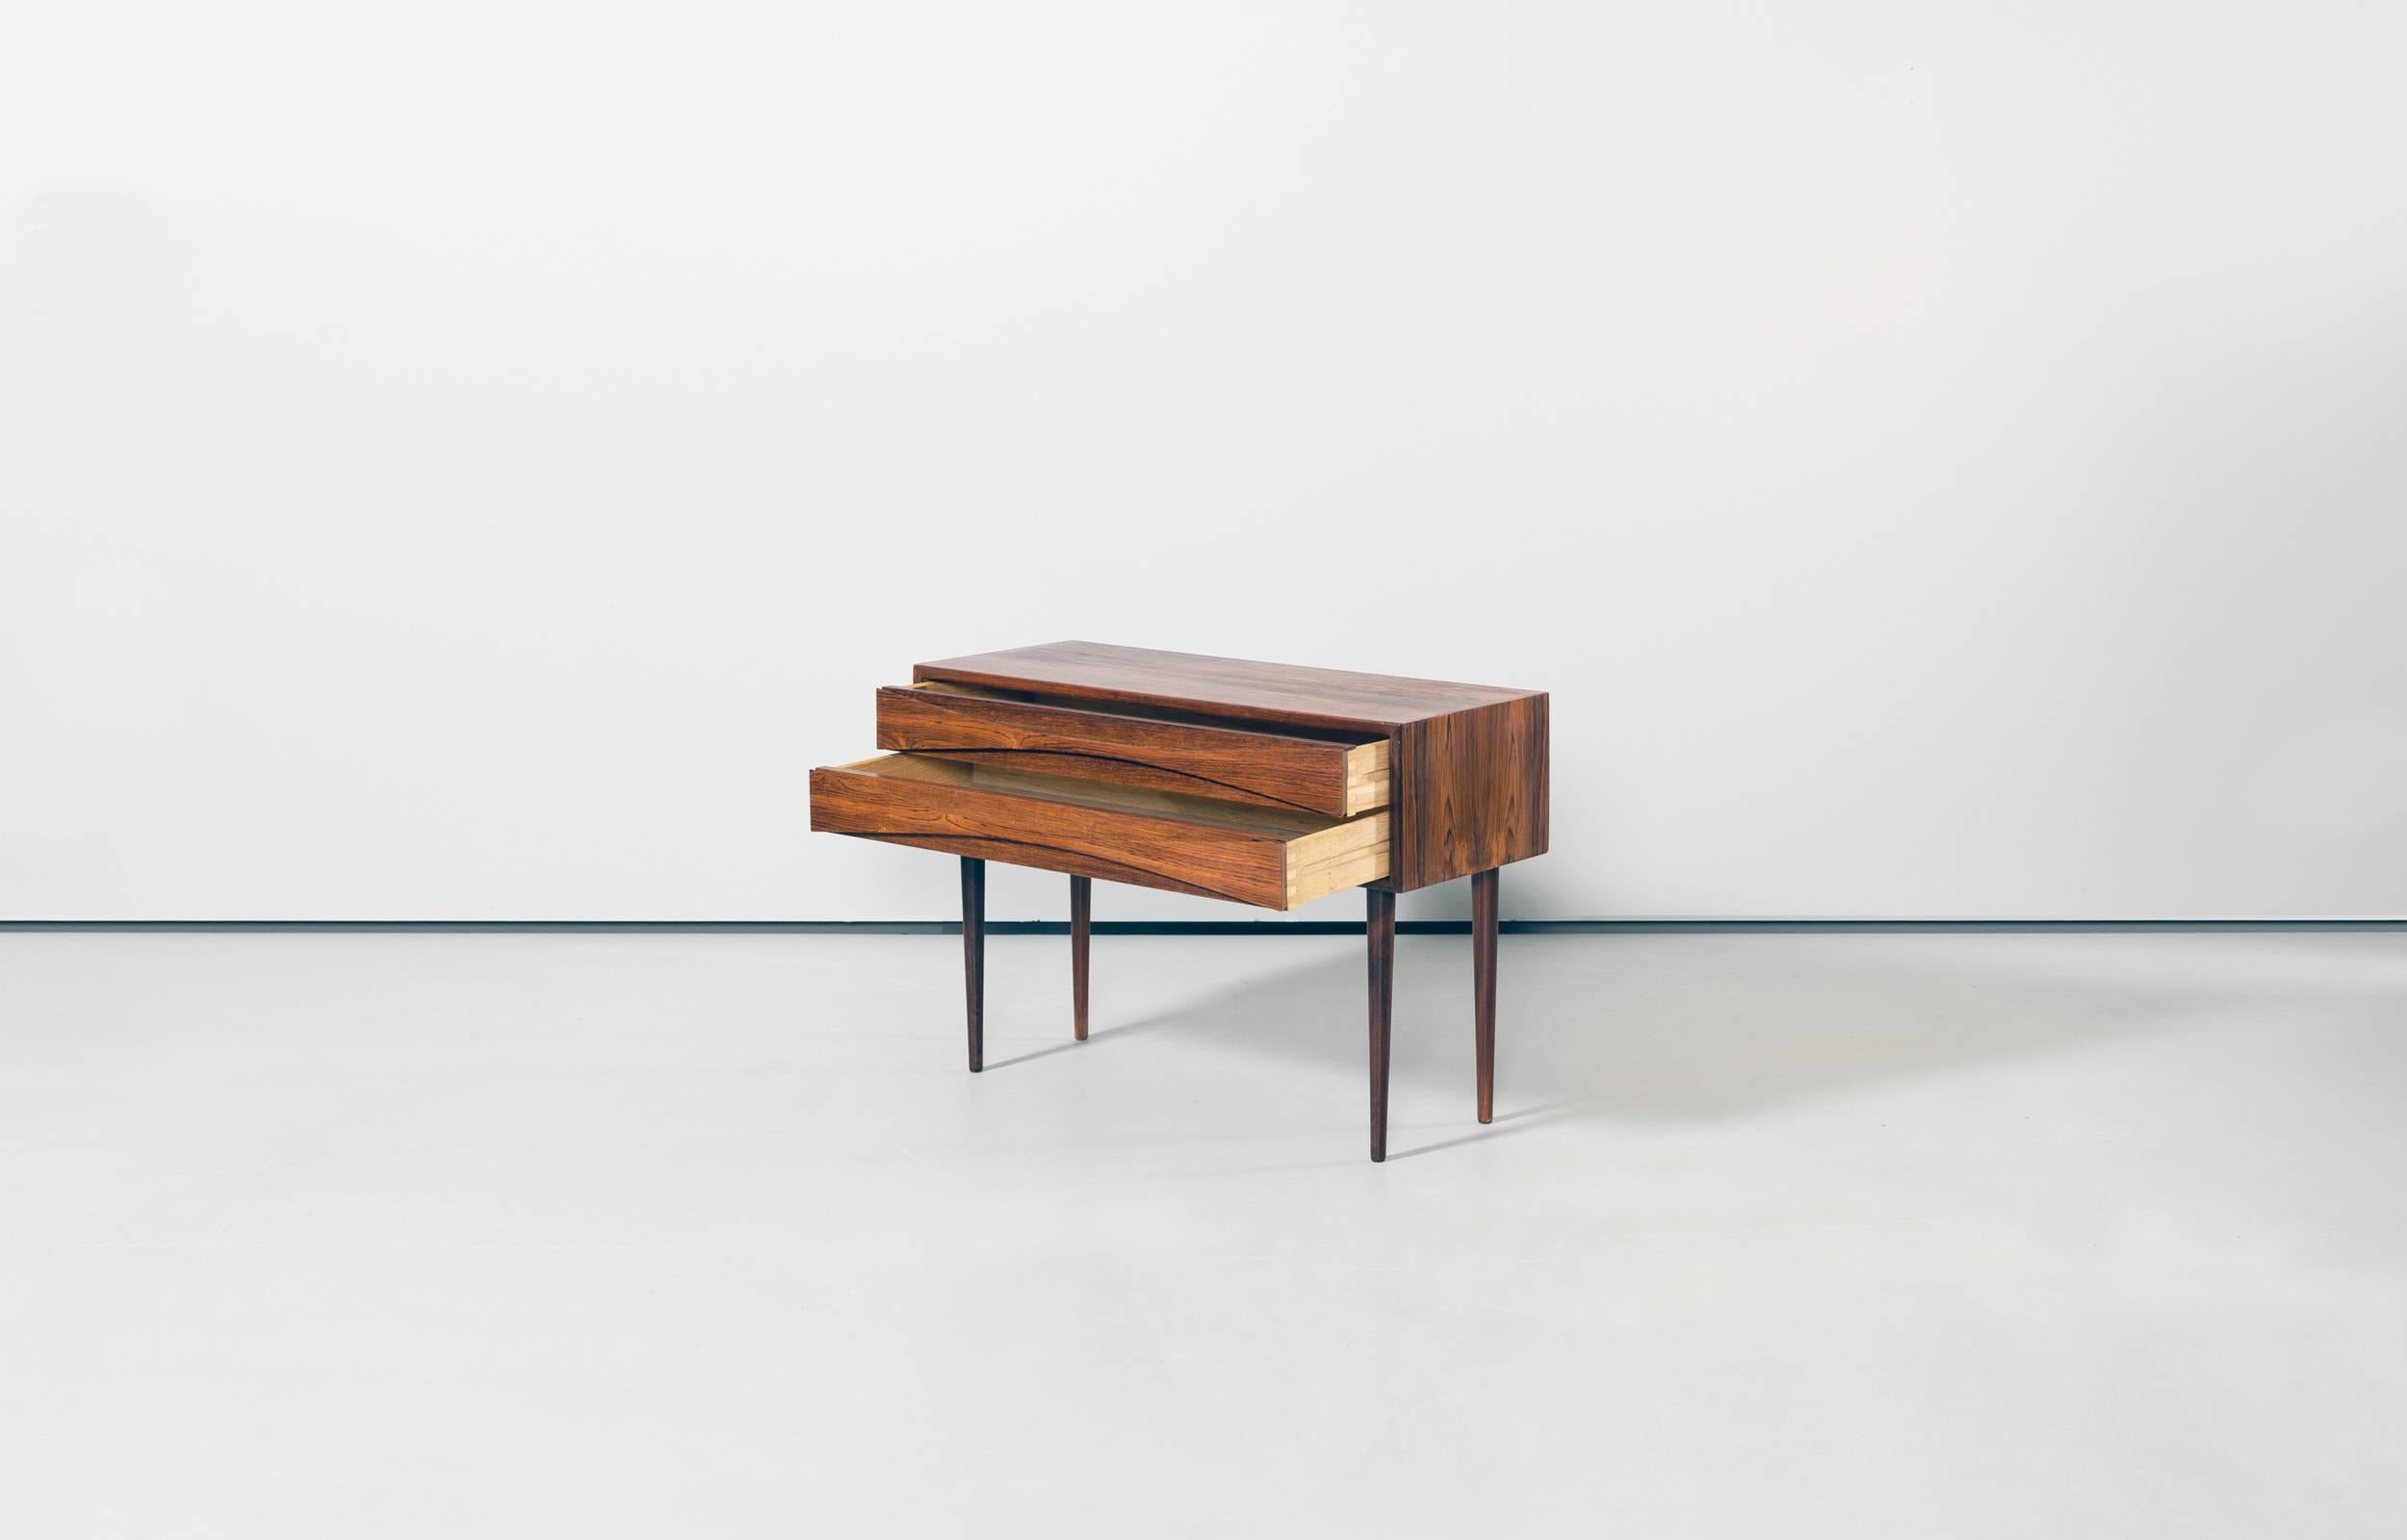 Rare chest of drawers designed by Arne Vodder and distributed by Sibast / NC Møbler, Odense. Highly structured wood grain. Chest made of veneer, legs of solid rosewood. A wonderful piece.

Perfect original condition with minor wear consistent with